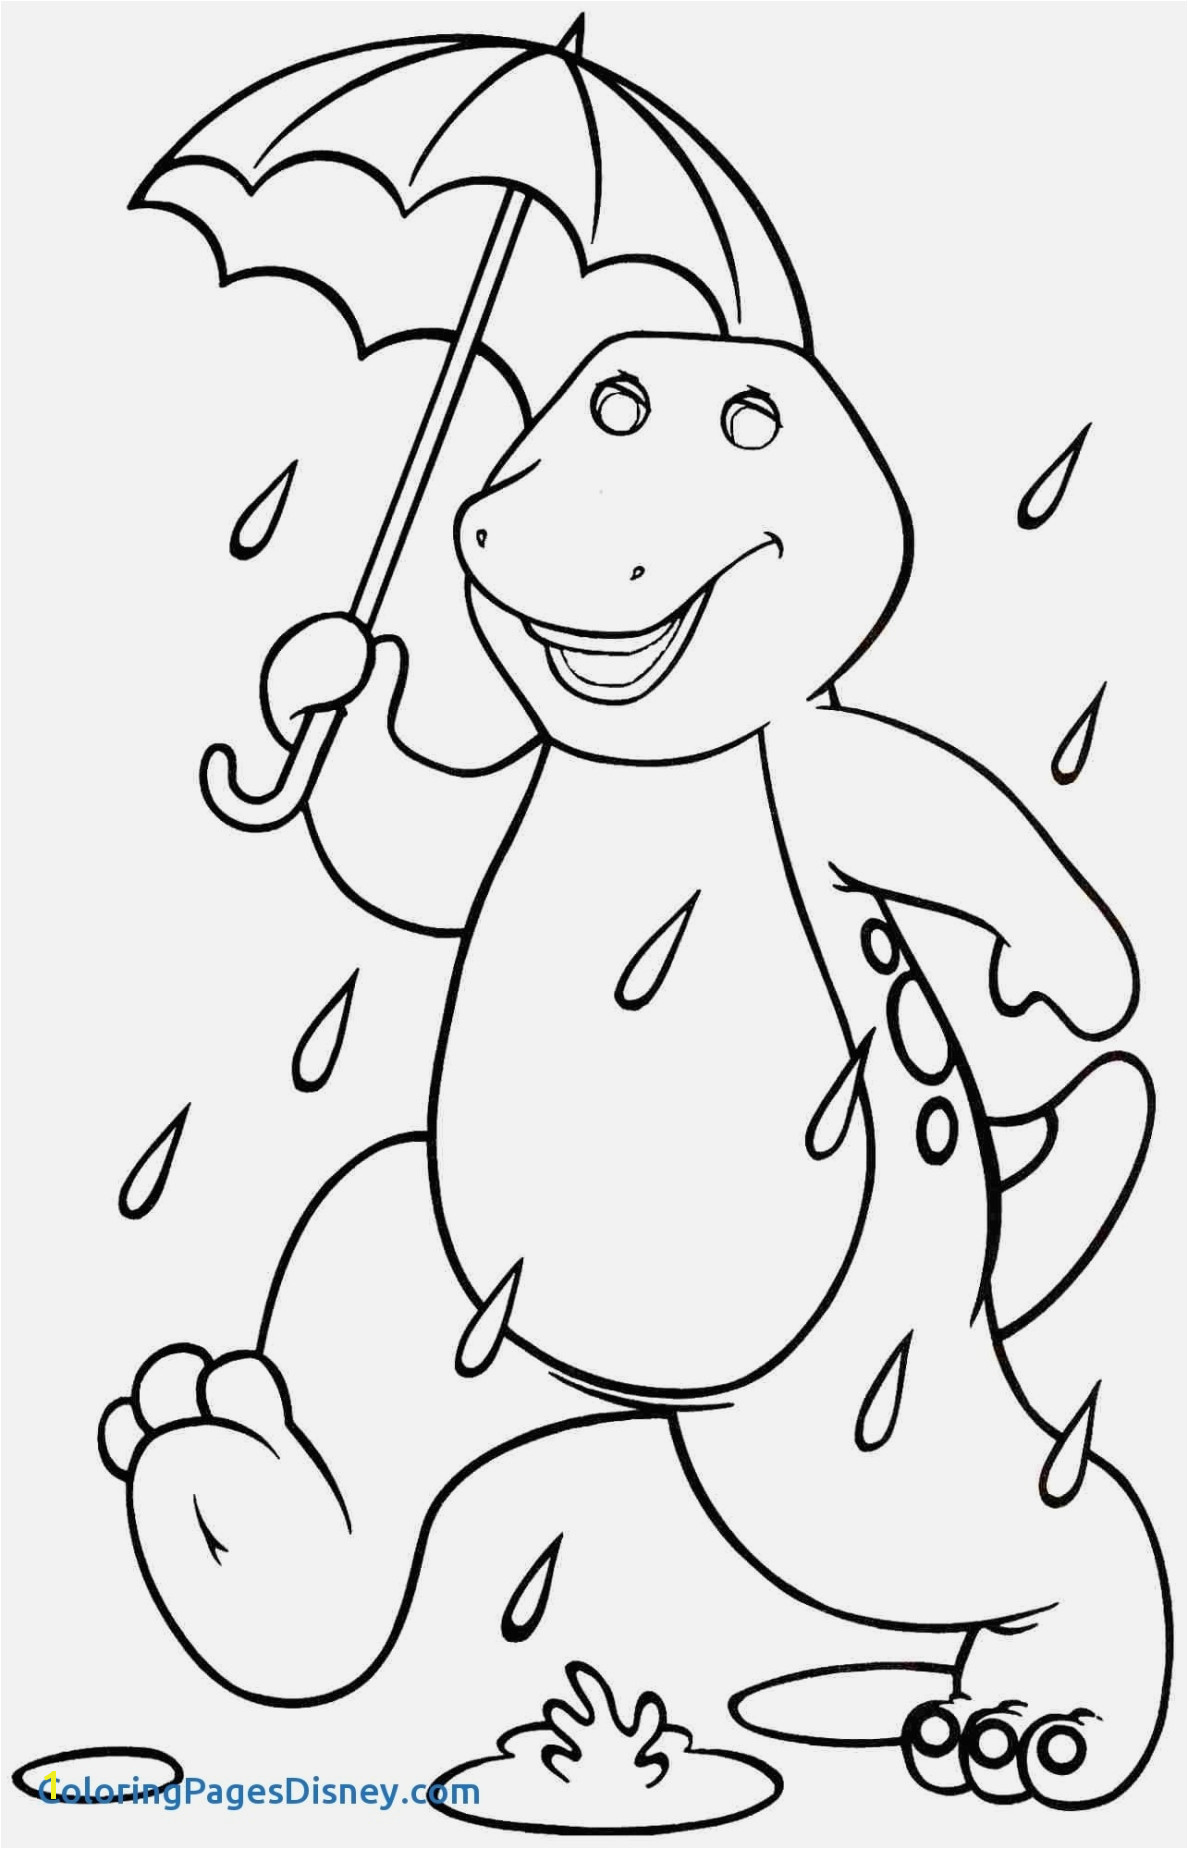 Friendship Coloring Pages Barney Coloring Pages Free Download Friendship Coloring Pages Best Ever 20 Coloring